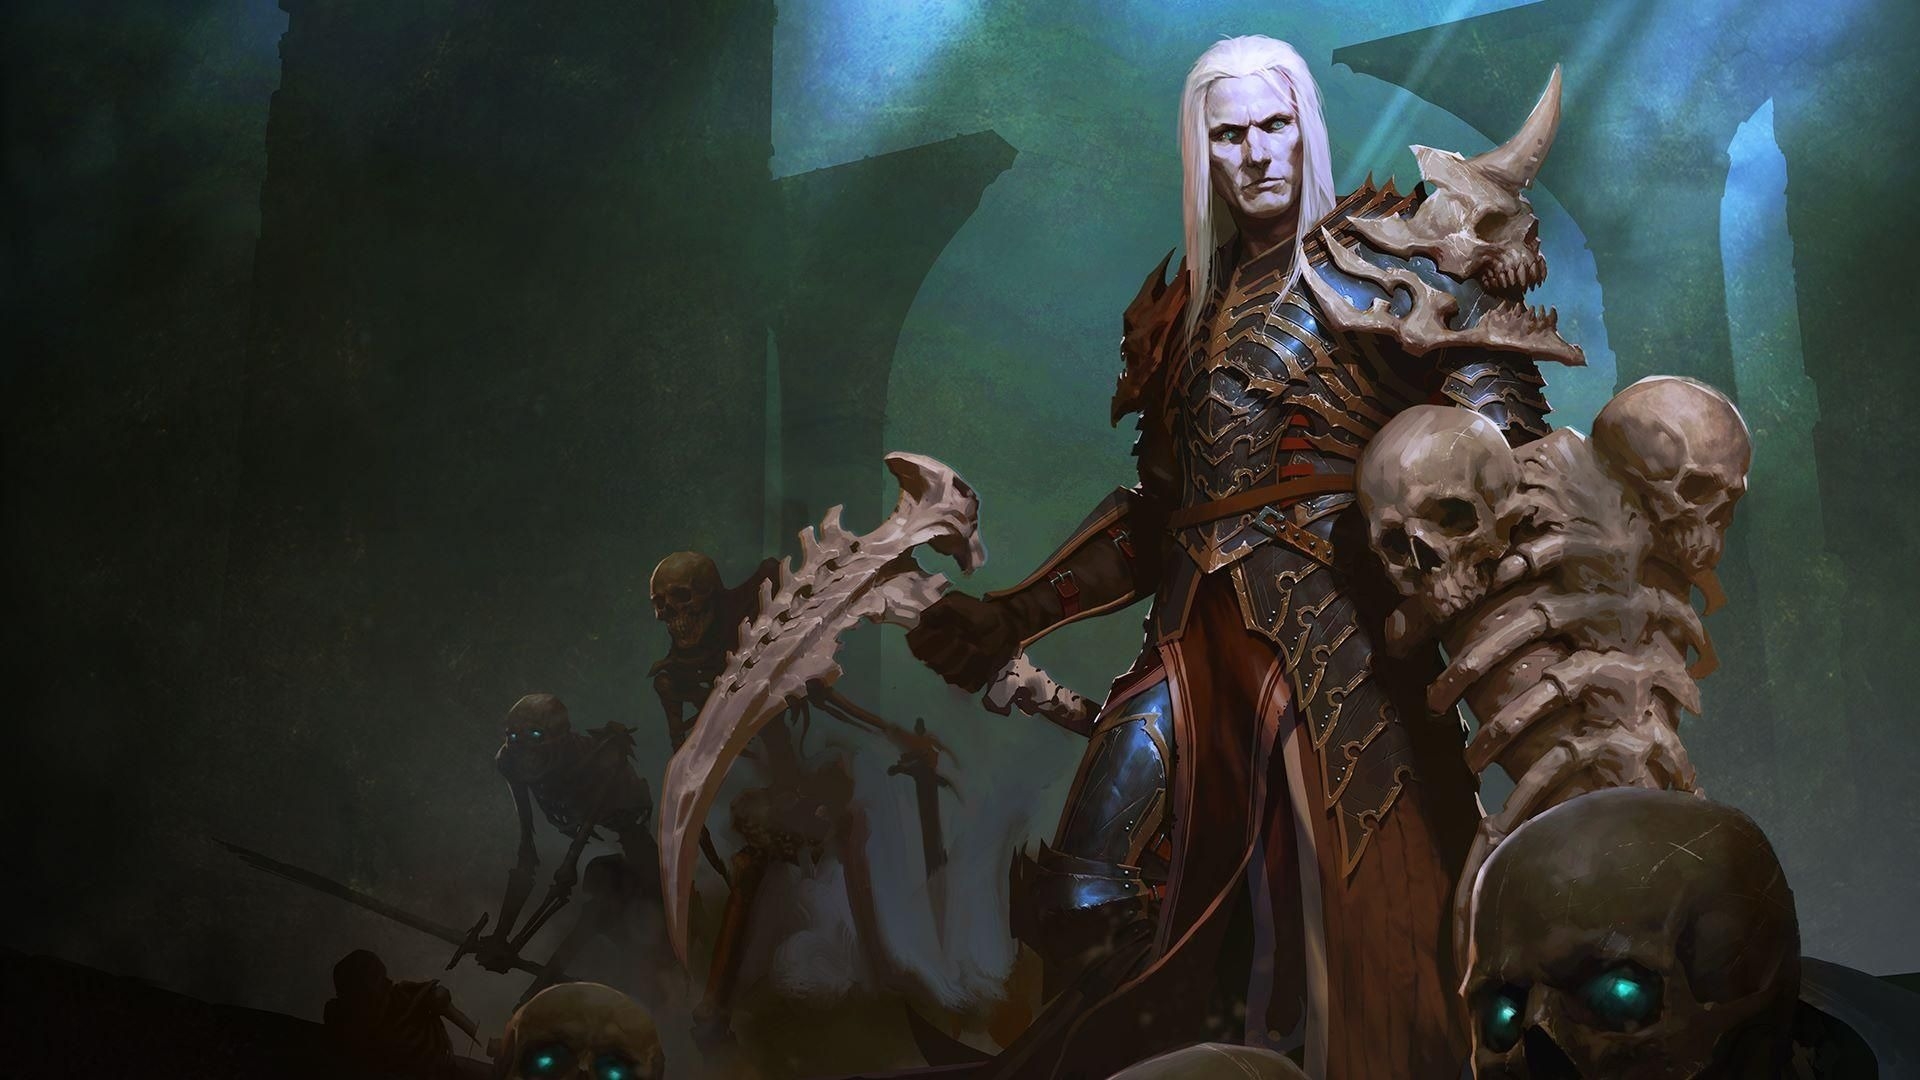 In this article, we are going to cover Diablo Immortal release date, as well as the classes, is Diablo Immortal going to be free, Diablo Immortal servers, and more.